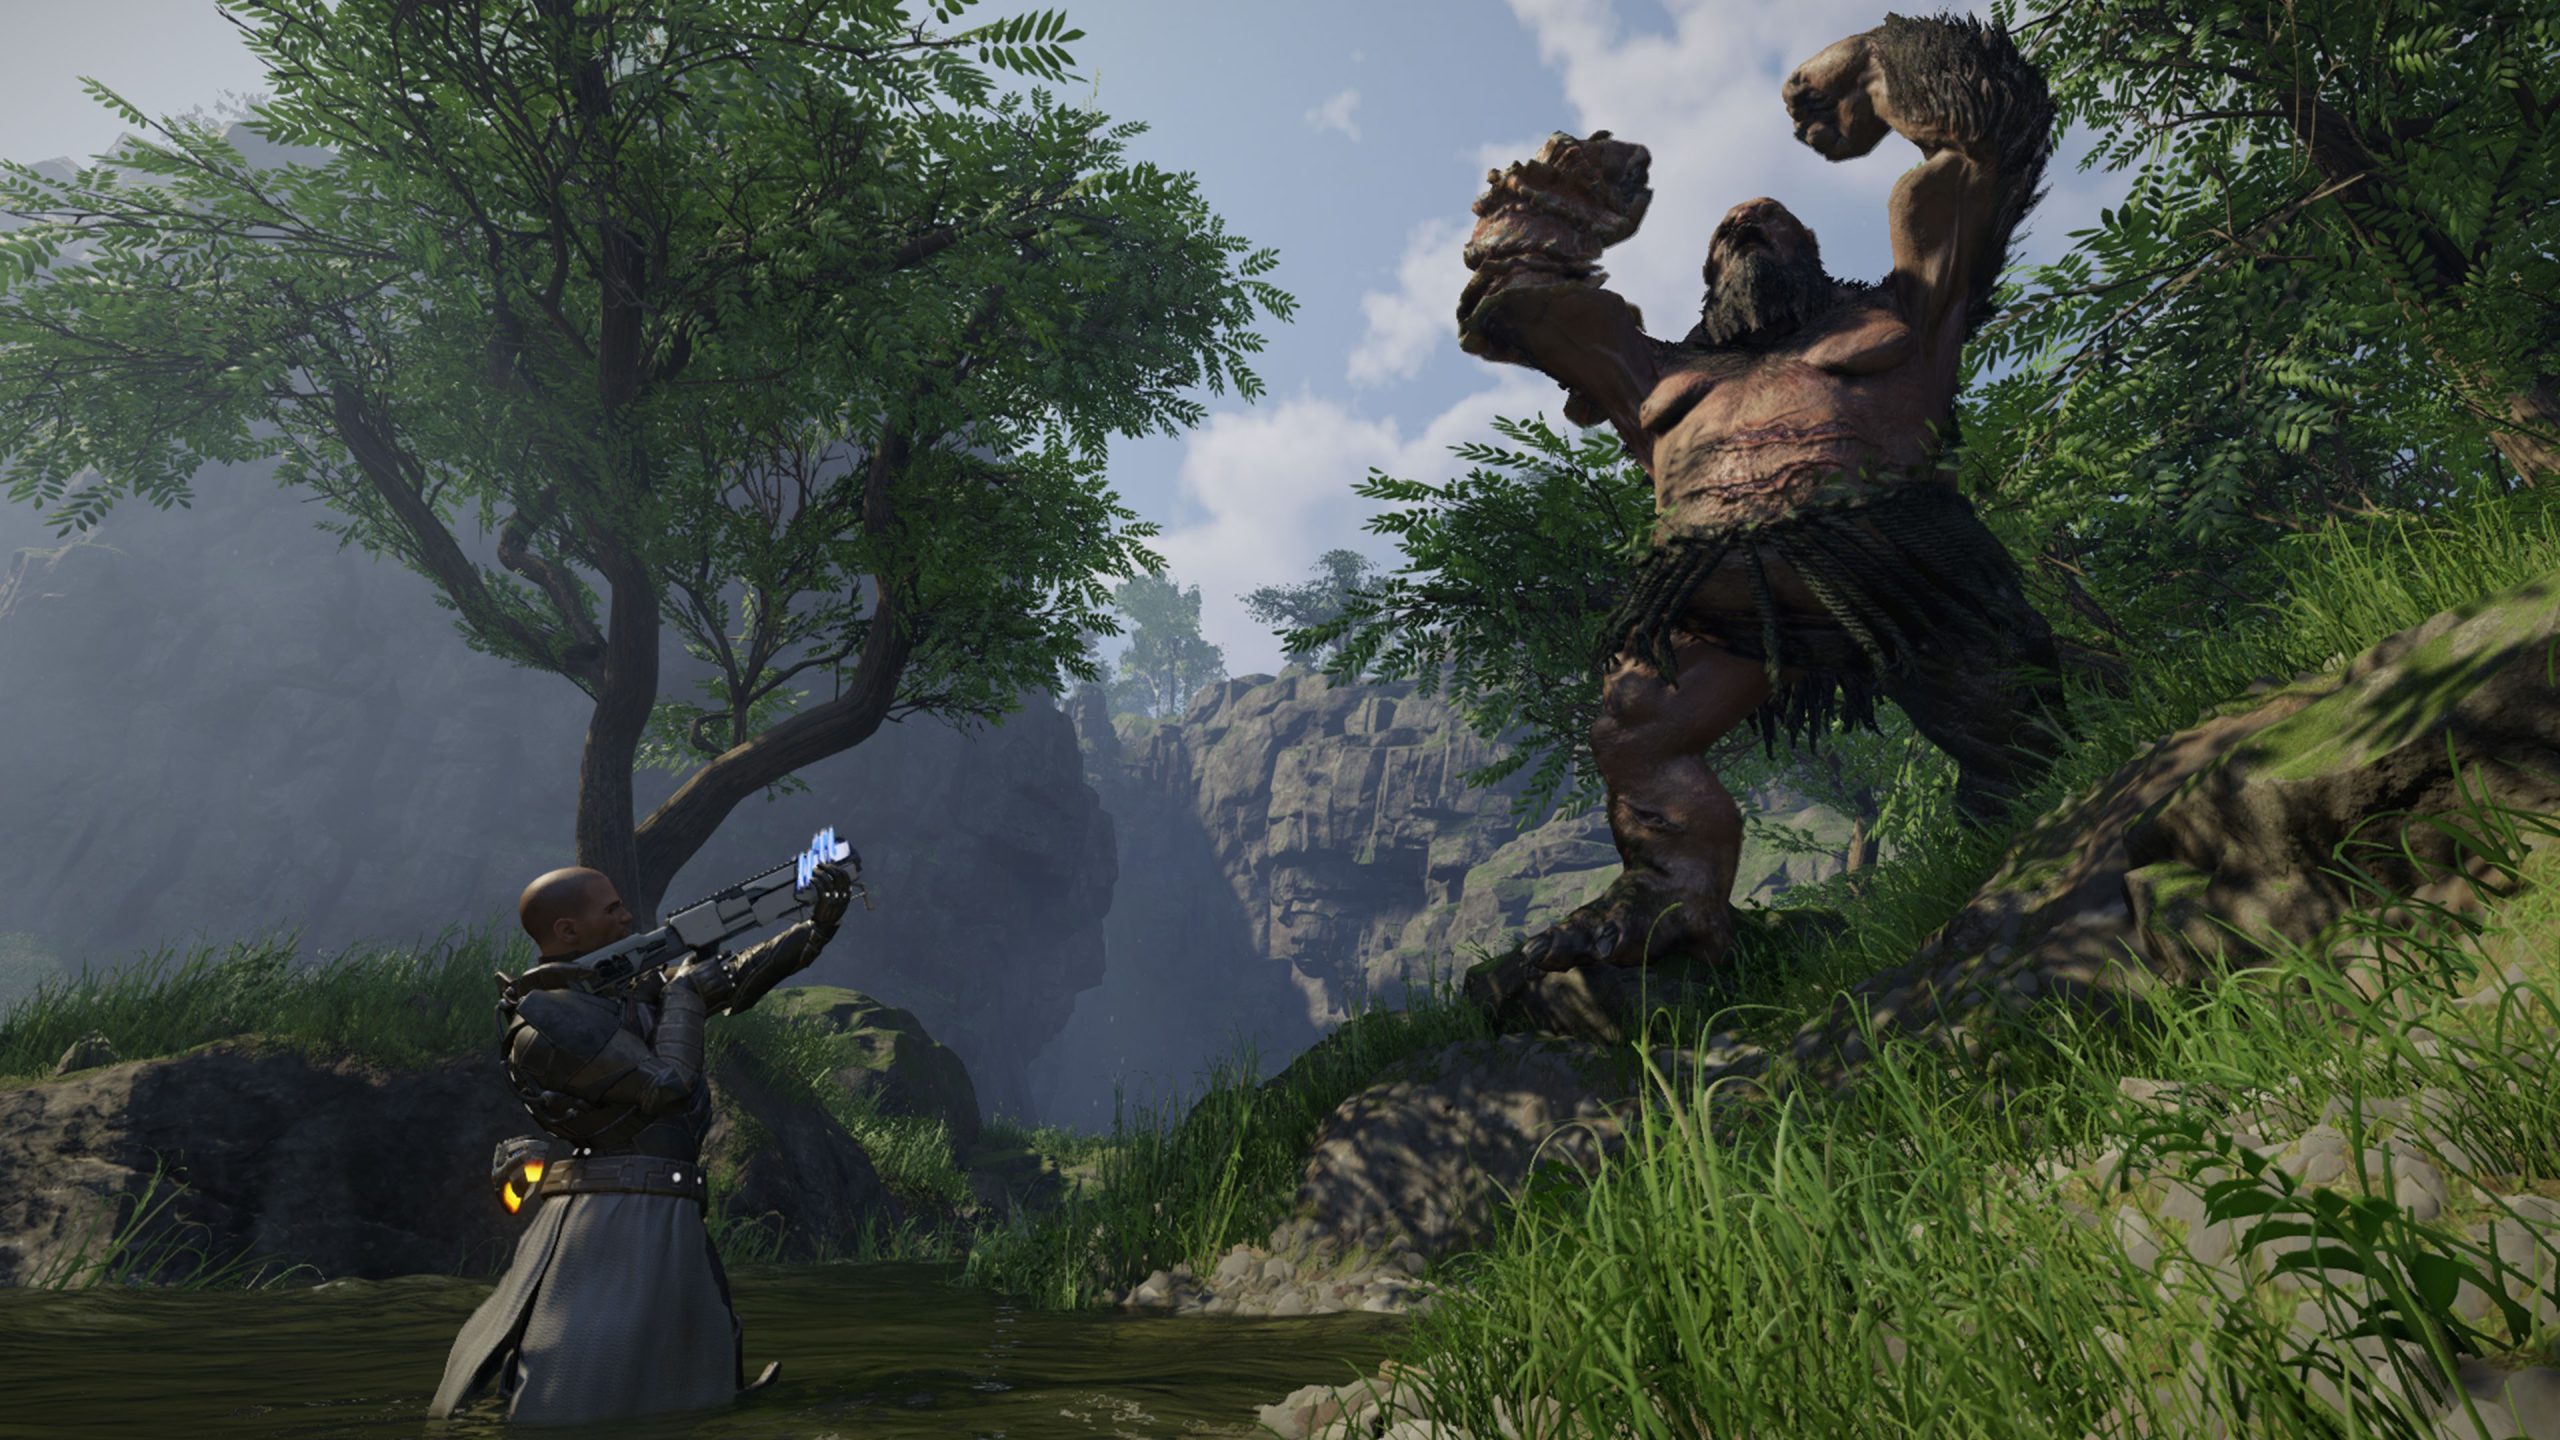 Elex II is a return to choicedriven, open world RPGs, and it’s